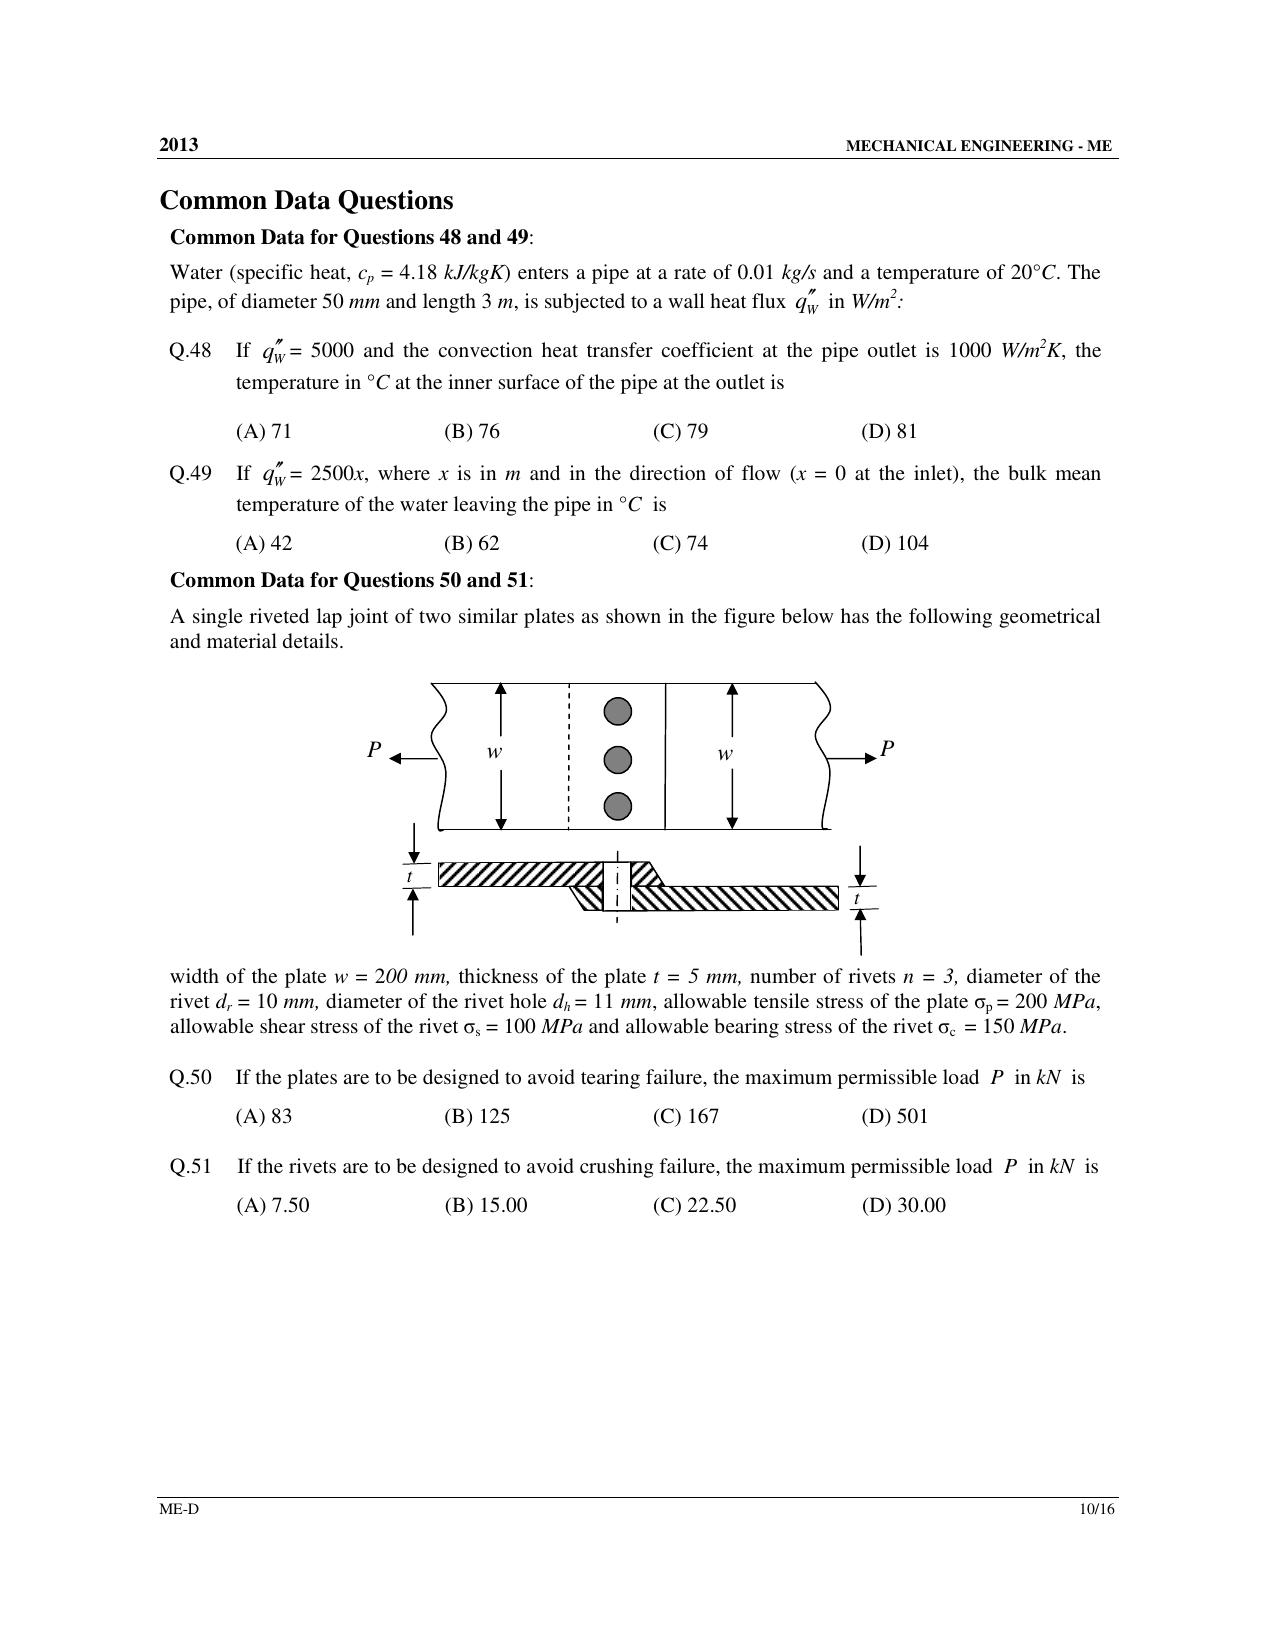 GATE 2013 Mechanical Engineering (ME) Question Paper with Answer Key - Page 53